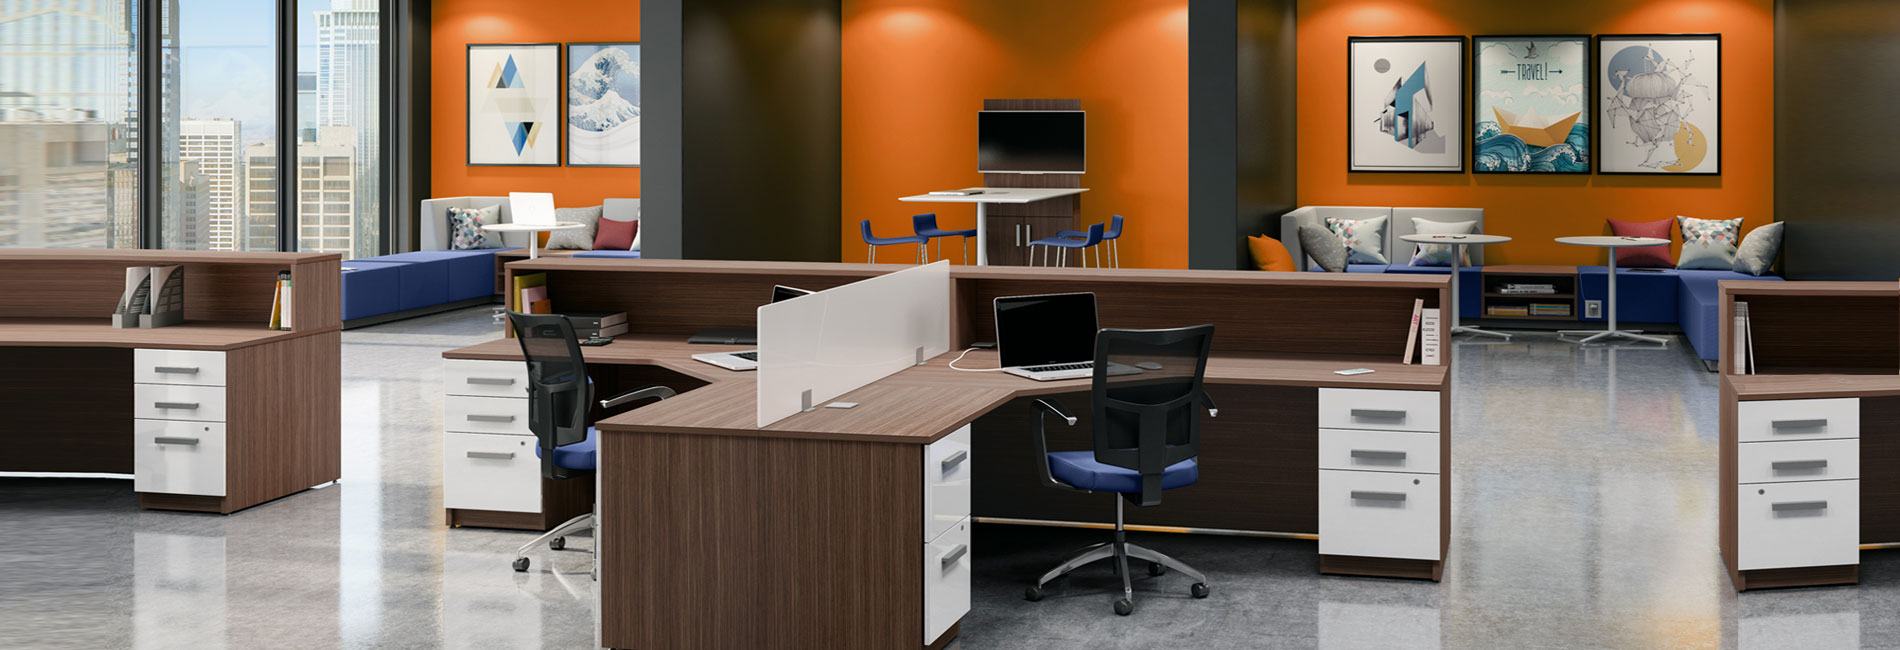 Office Furniture Cubicles Filing Seating And So Much More